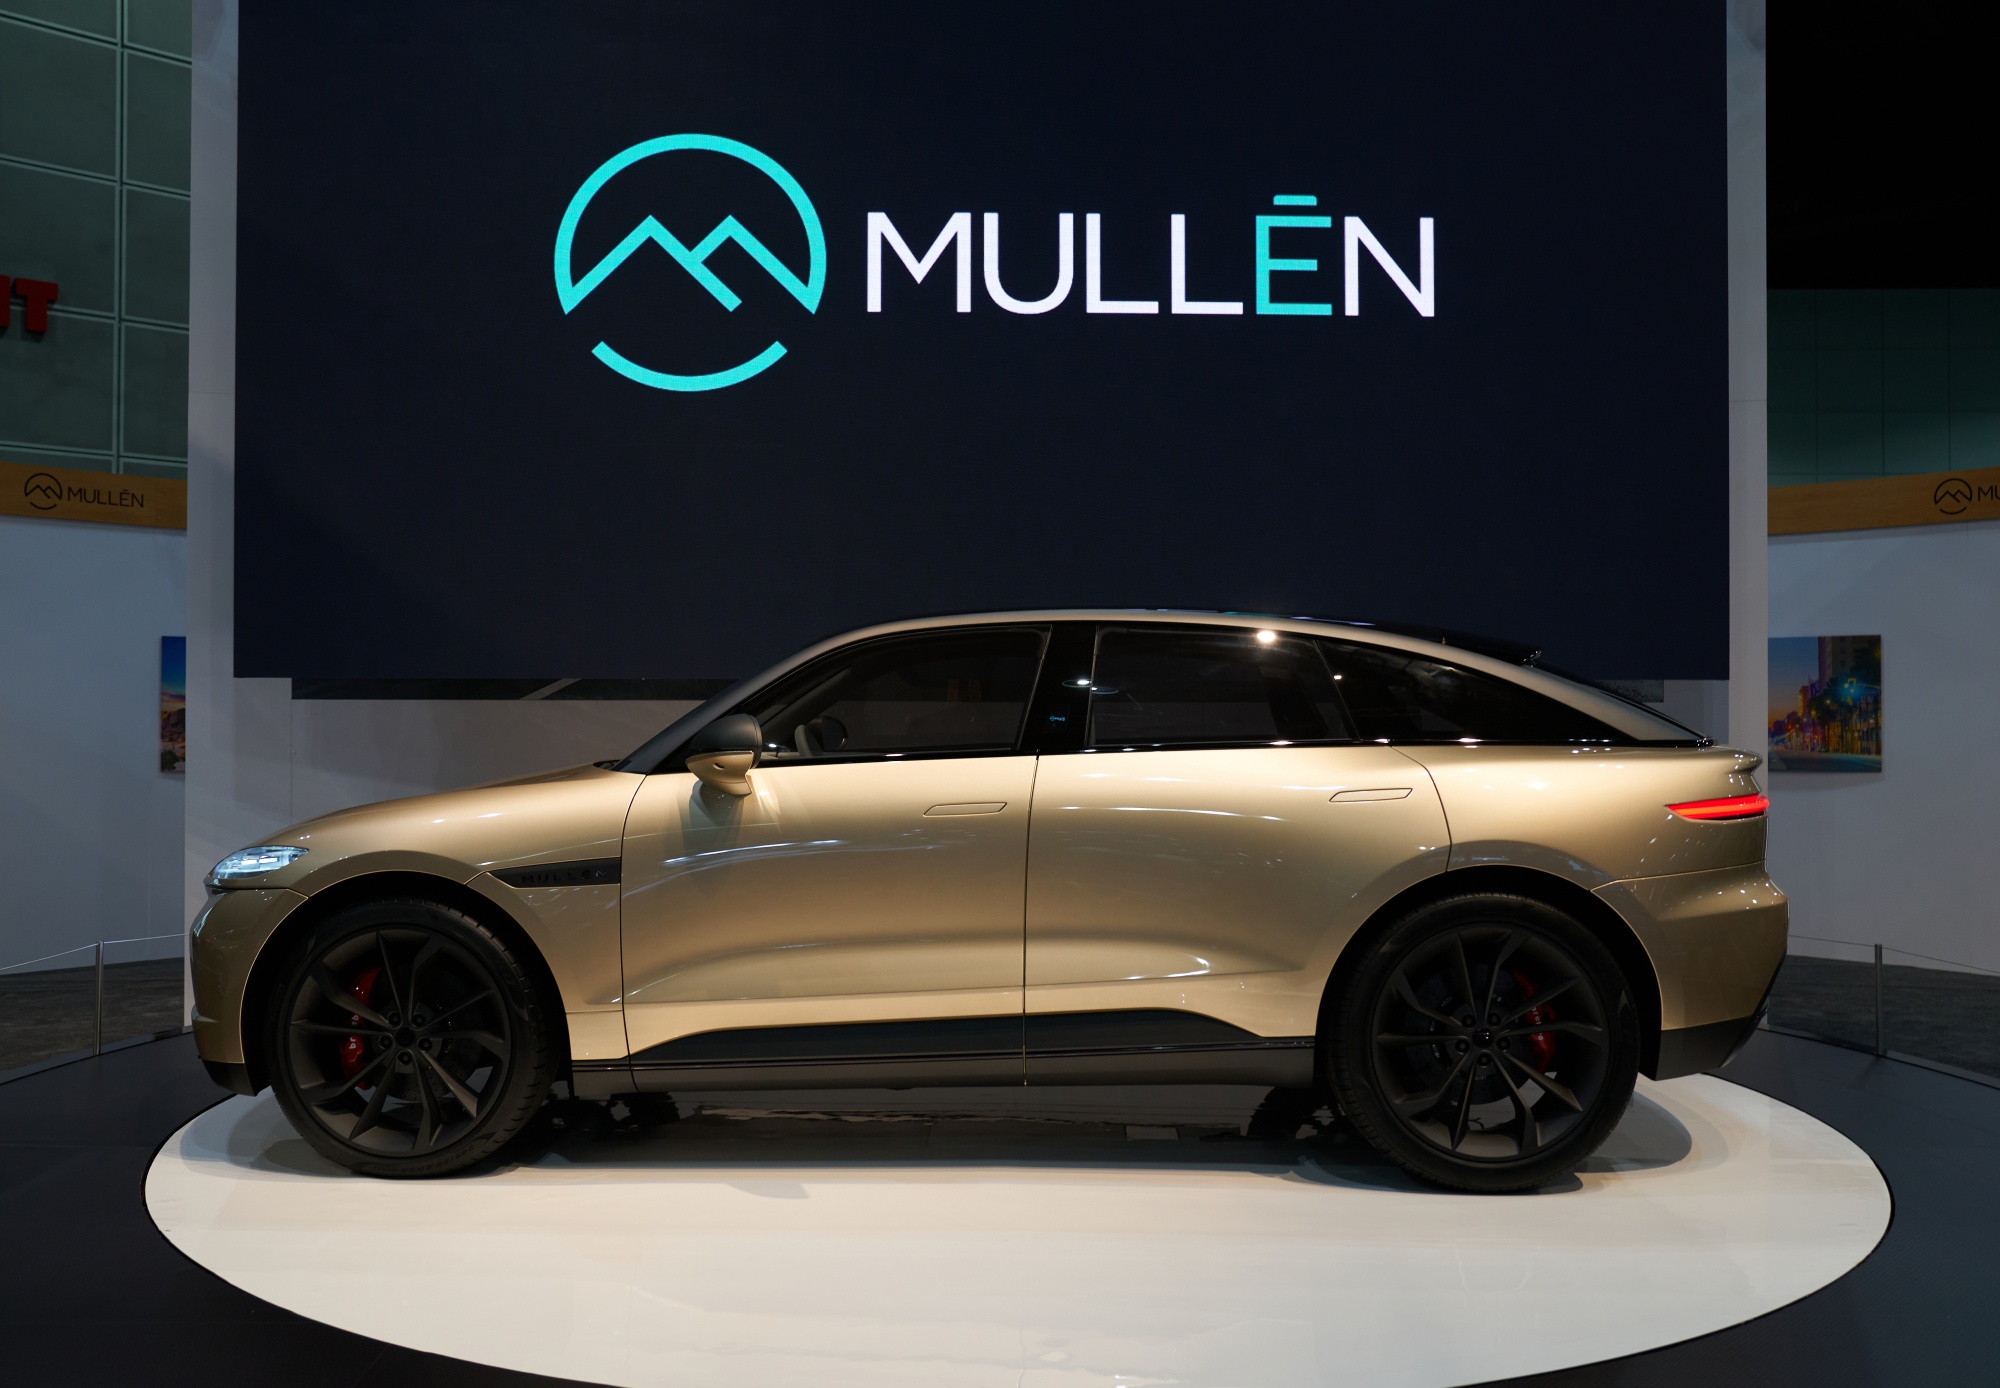 A Mullen Five electric vehicle prototype on display in&nbsp;2021.